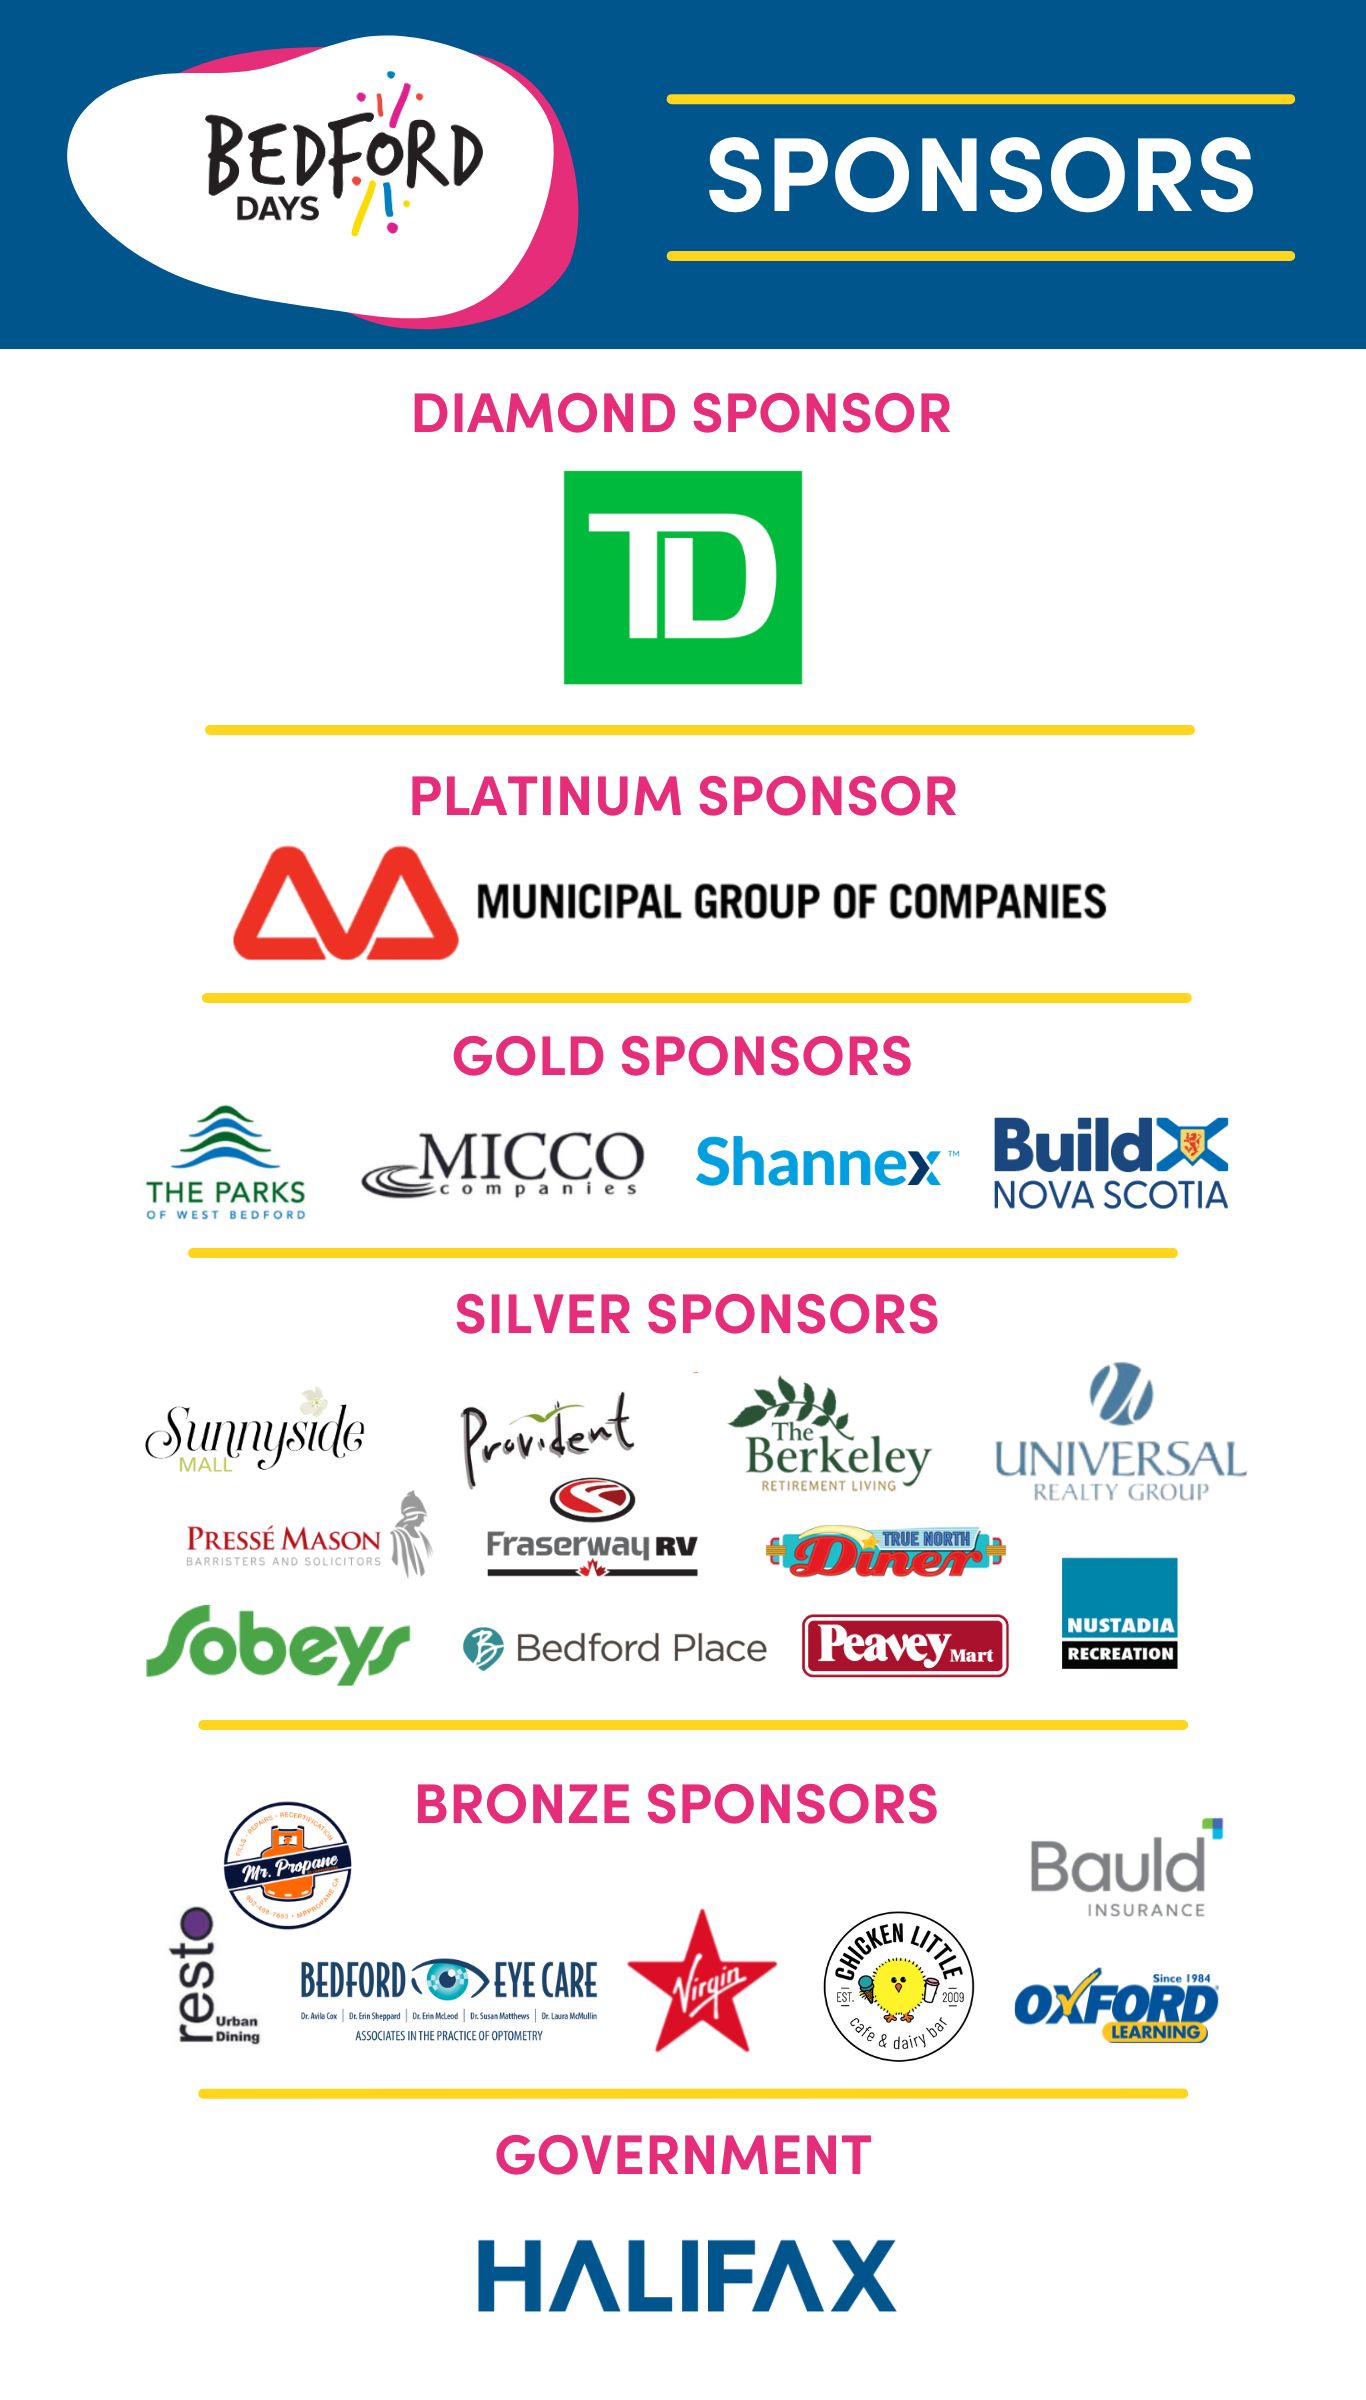 Bedford Days sponsors - divided by sponsorship level and displayed by individual company logos.